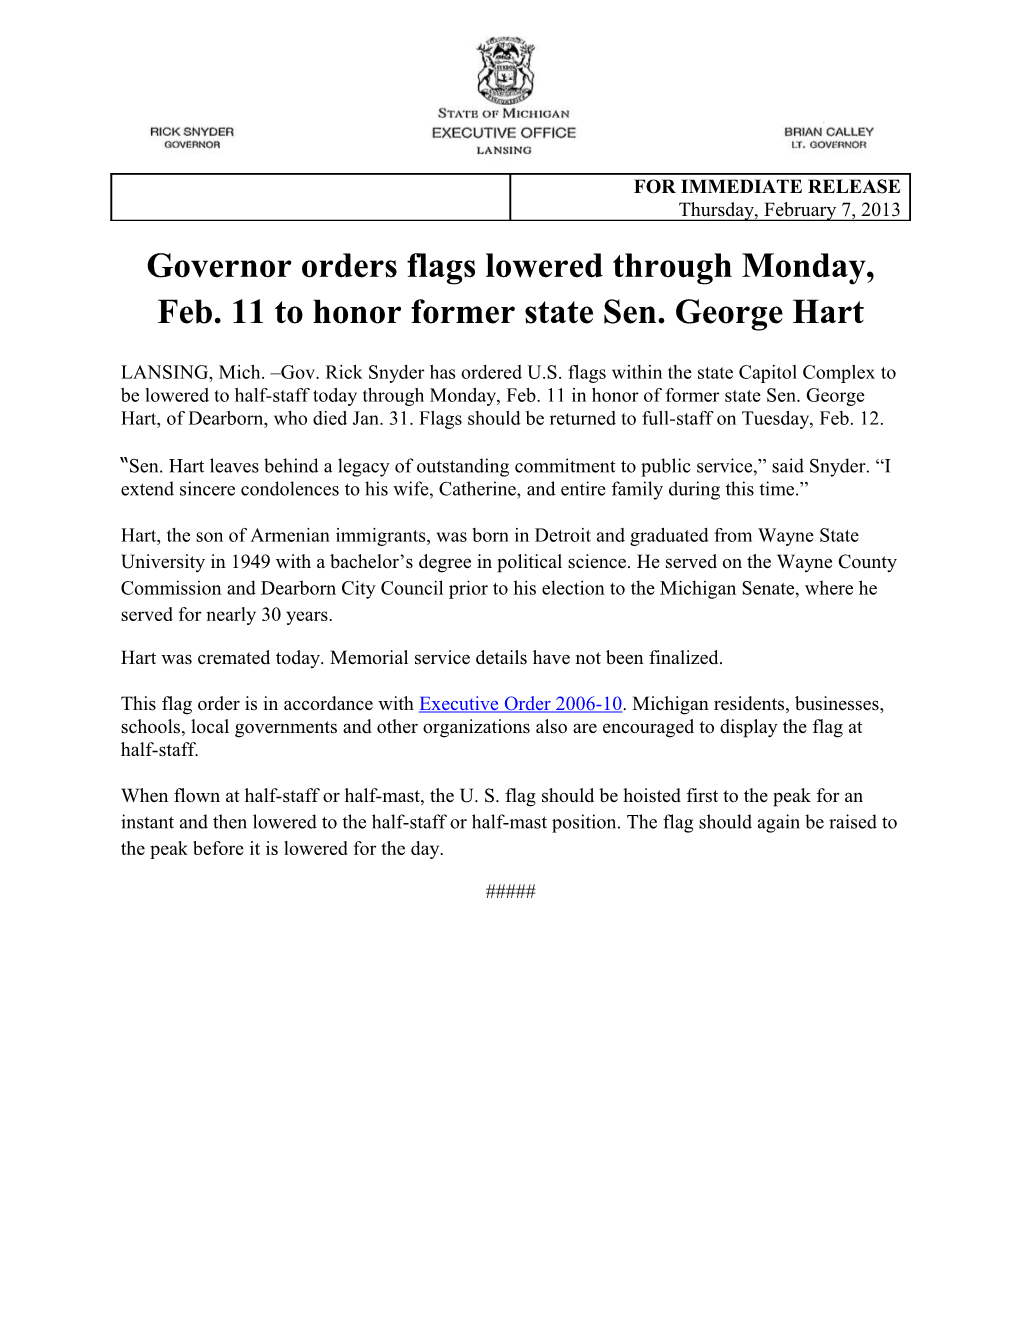 Governor Orders Flags Lowered Through Monday, Feb. 11 to Honor Former State Sen. George Hart